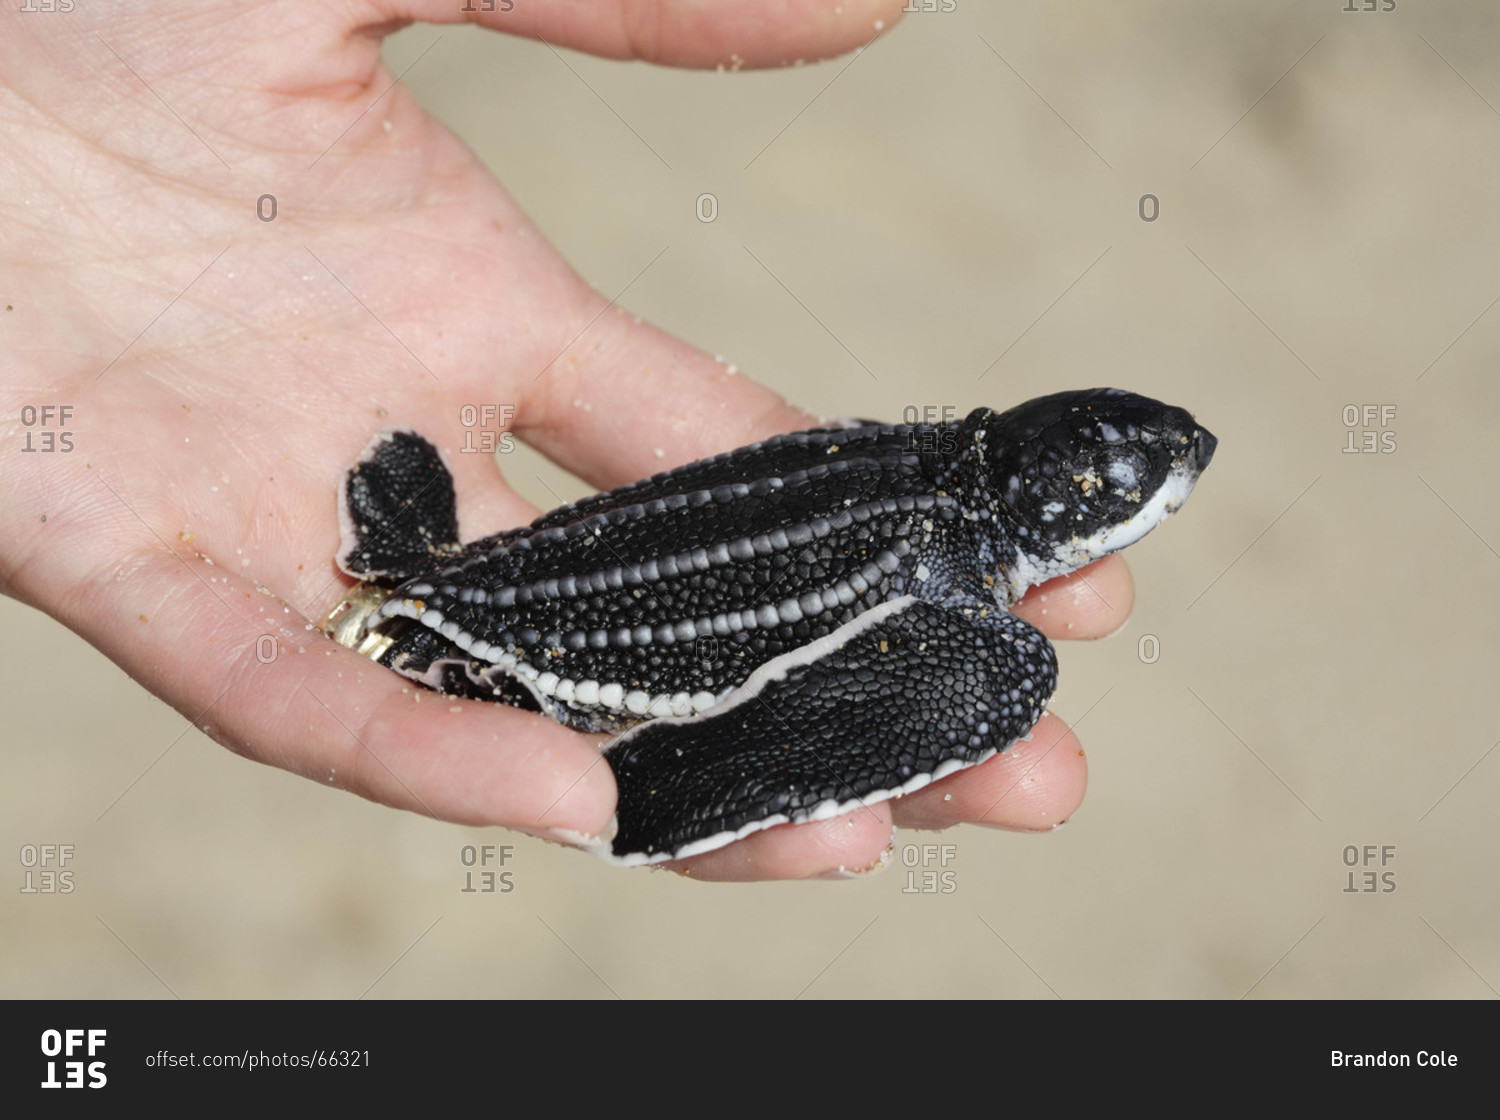 A woman holding a Leatherback Sea Turtle hatchling